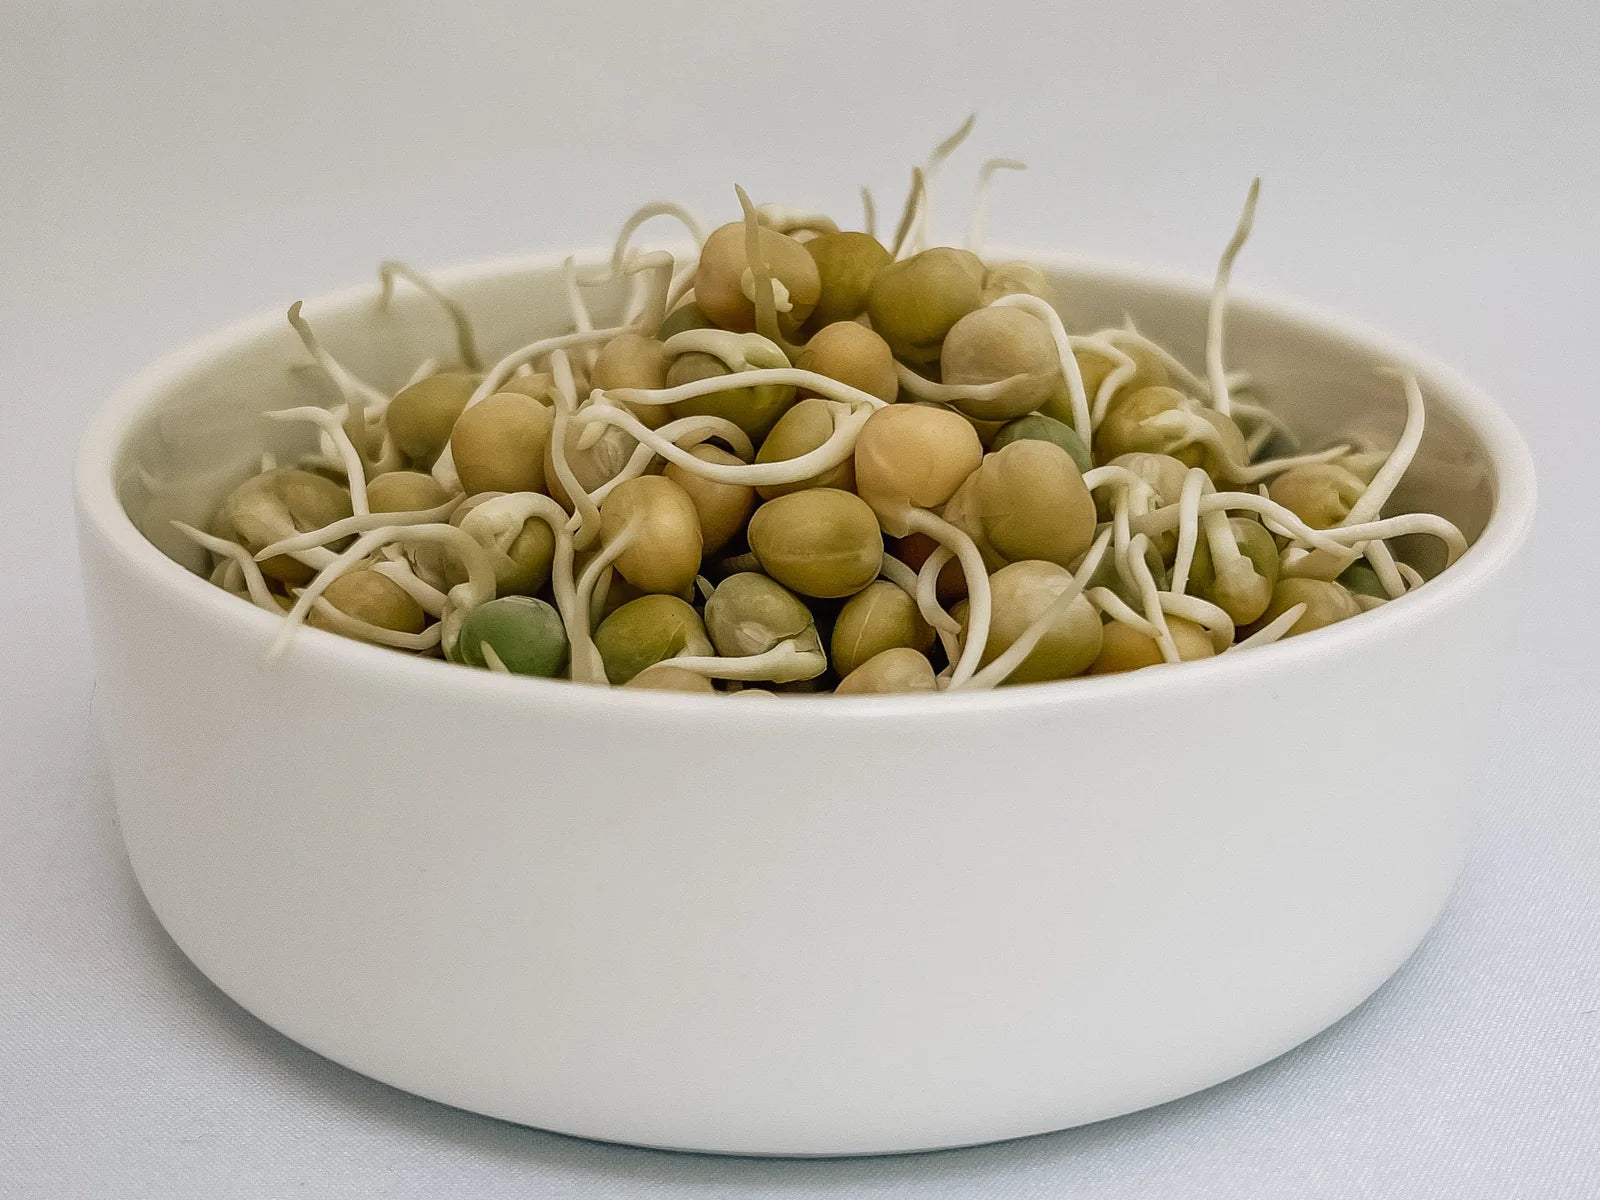 Green Peas Sprouts in a Bowl